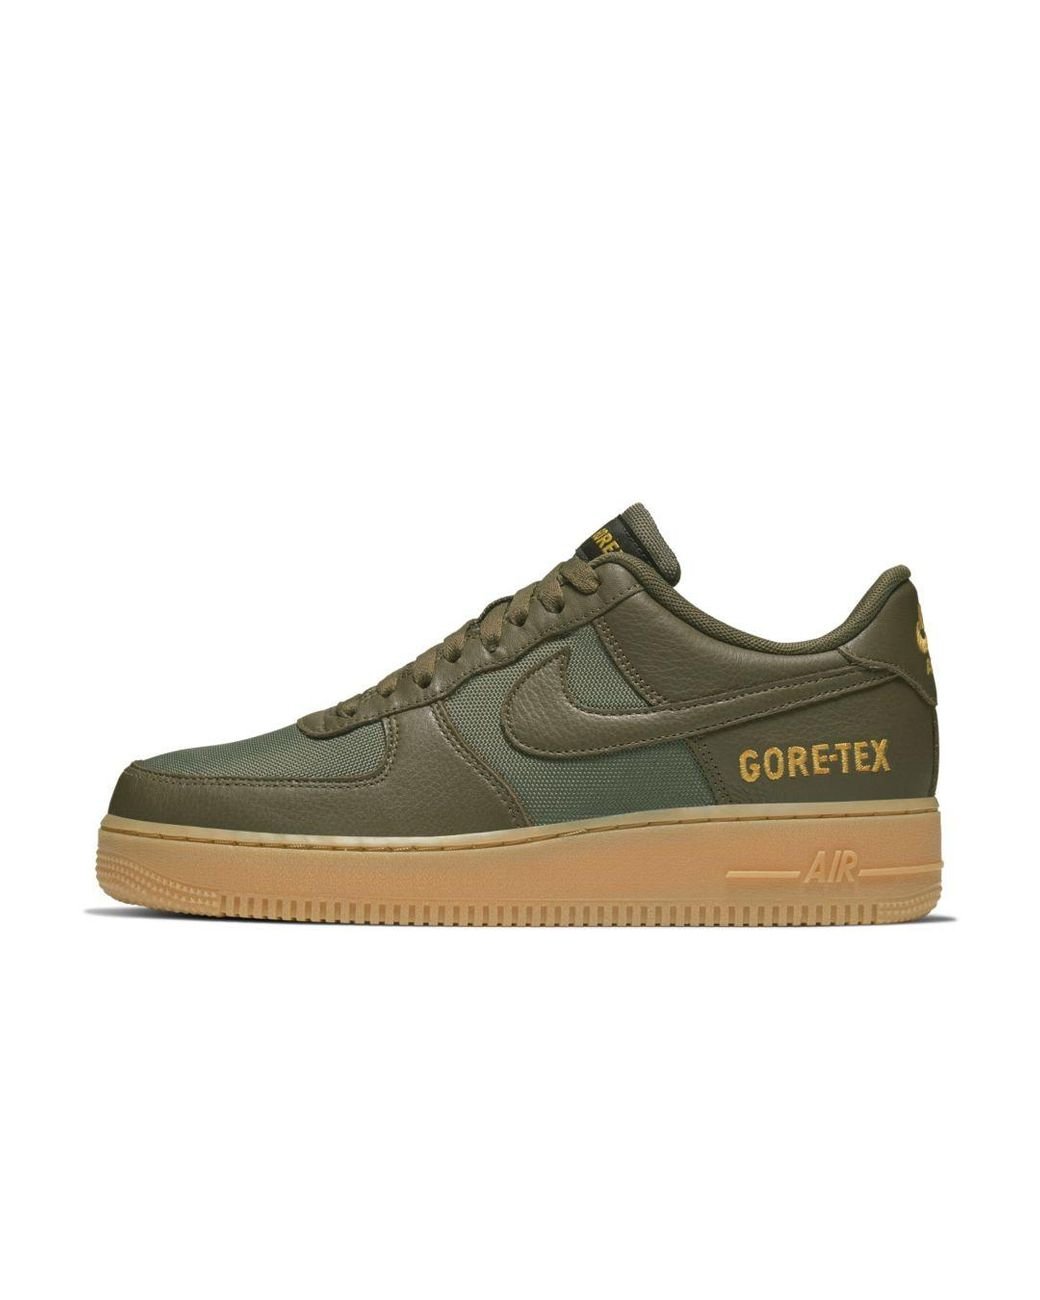 Nike Rubber Air Force 1 Gore-tex Shoe in Olive (Green) for Men - Lyst